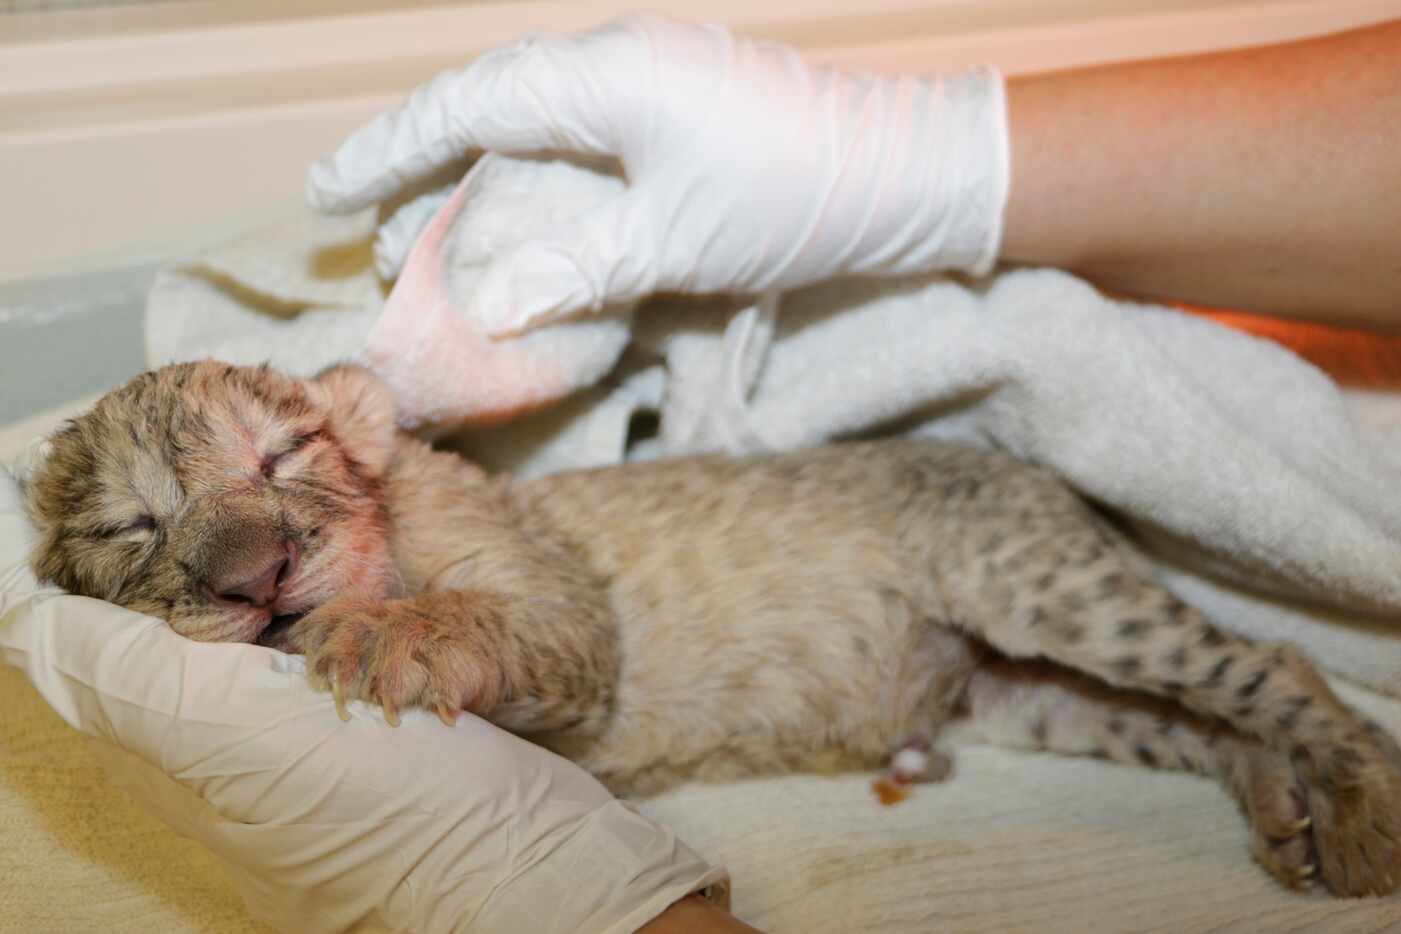 Lion cub Bahati Moja was born March 17 at the Dallas Zoo. She weighed at 2.8 pounds at birth.